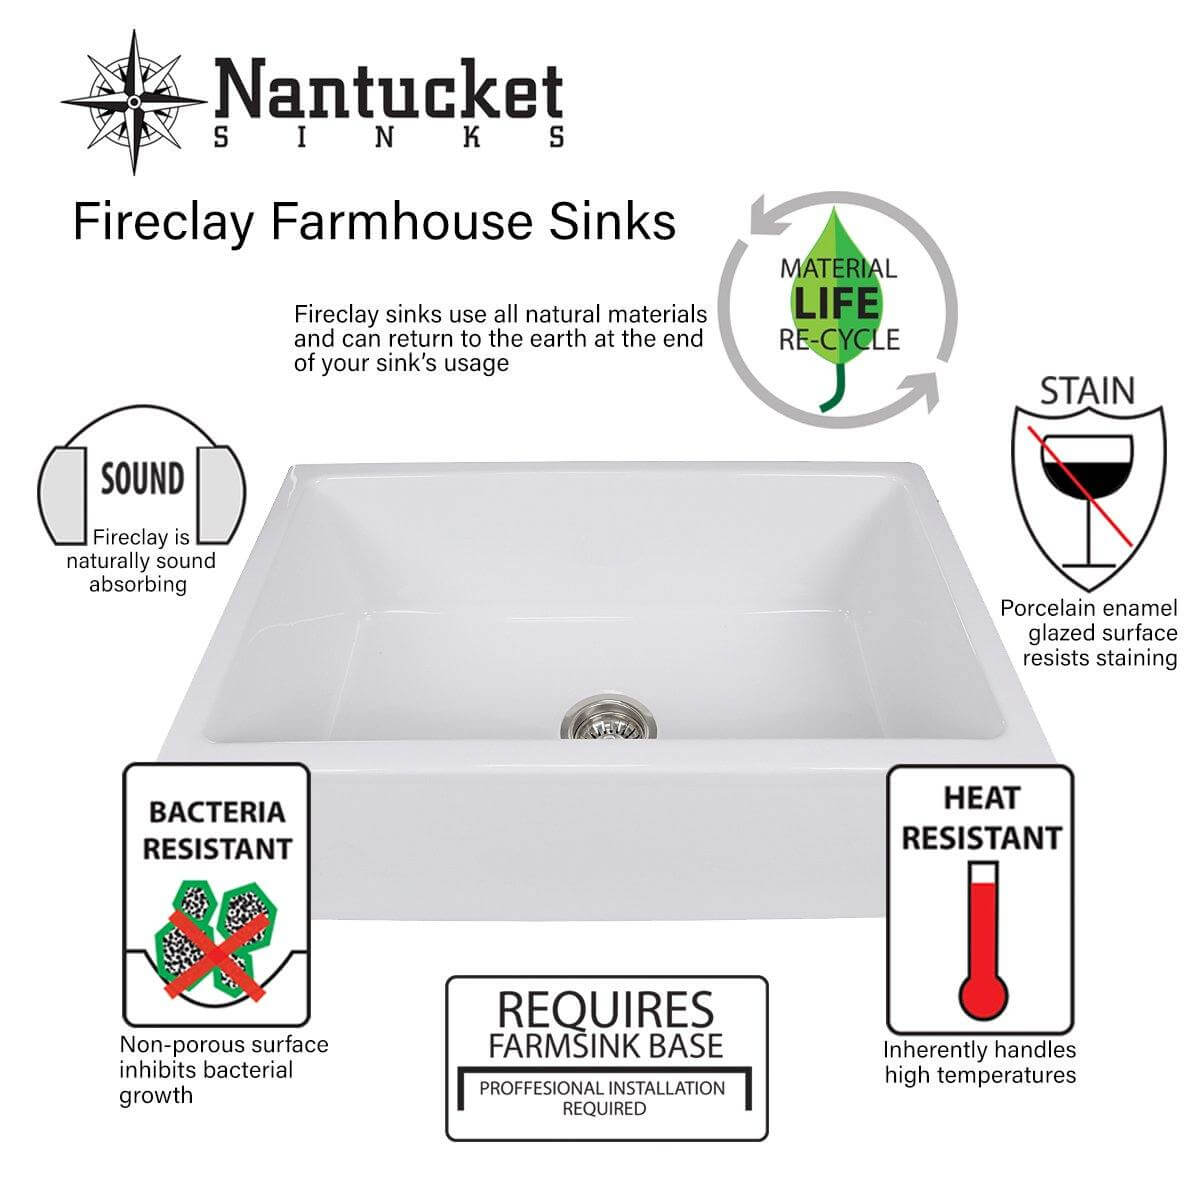 Nantucket Sinks' 33 Inch Farmhouse Fireclay Sink with Waves Apron